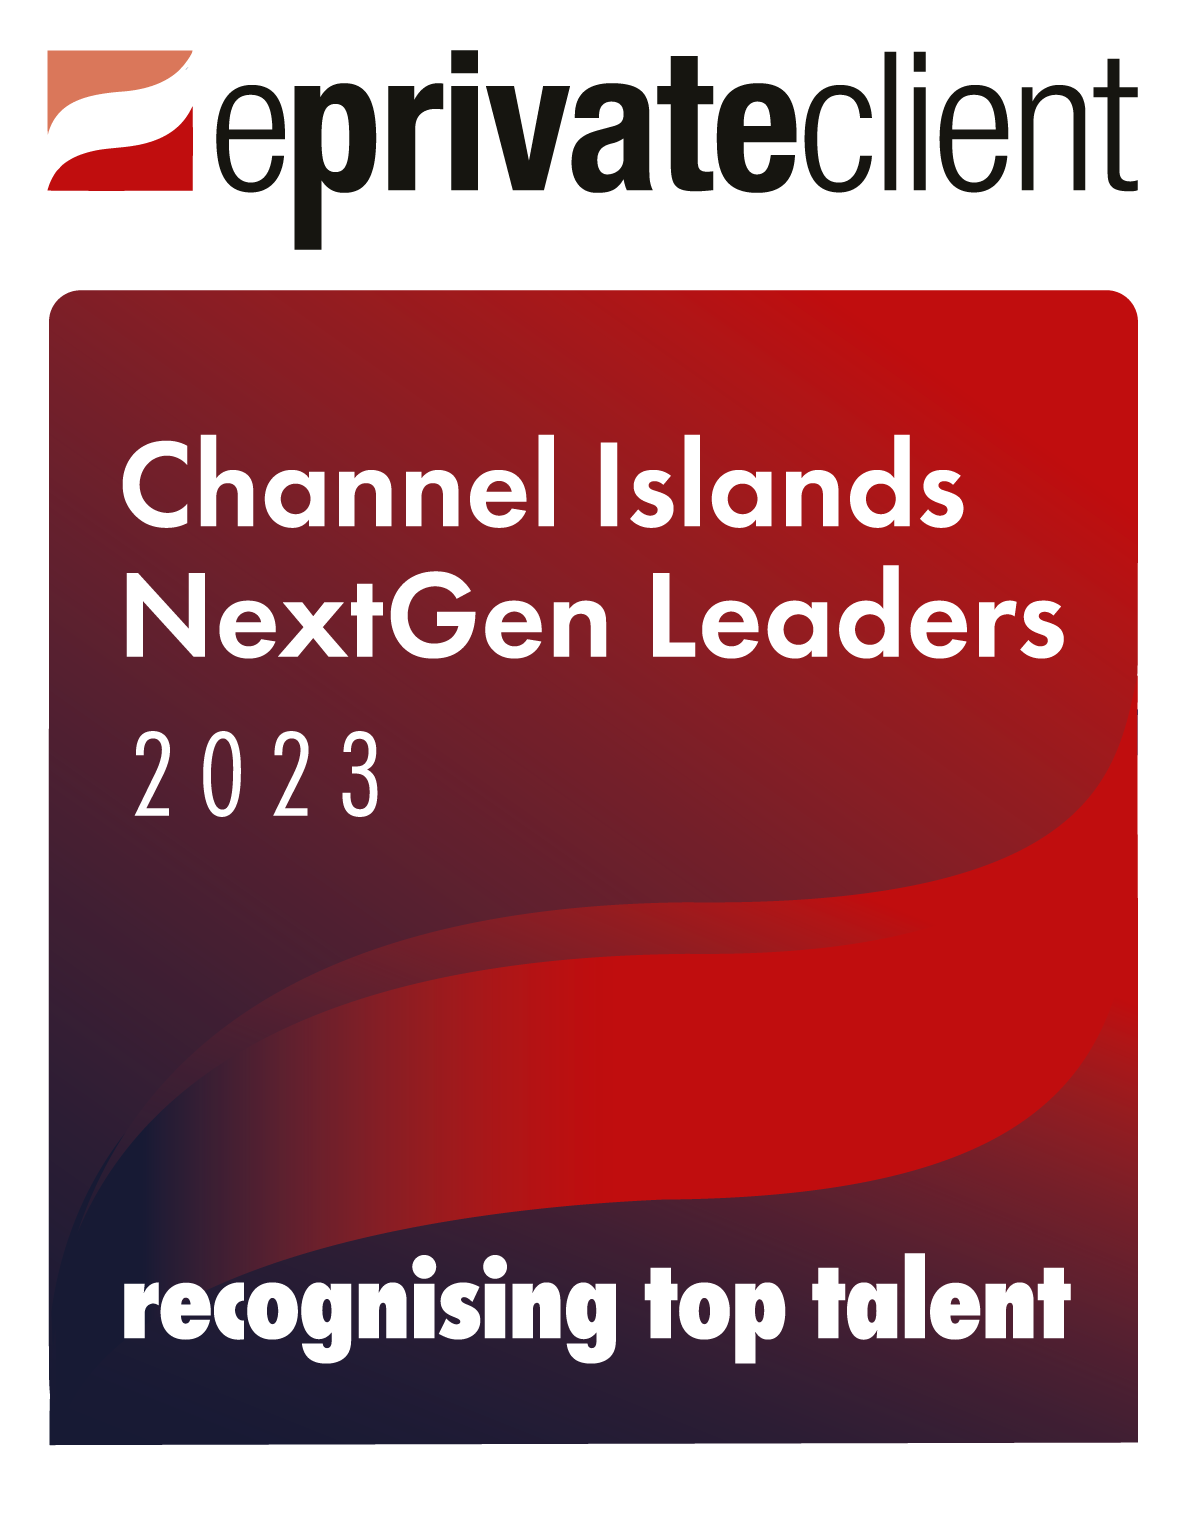 Just one week left to nominate the 2023 eprivateclient Channel Islands NextGen Leaders